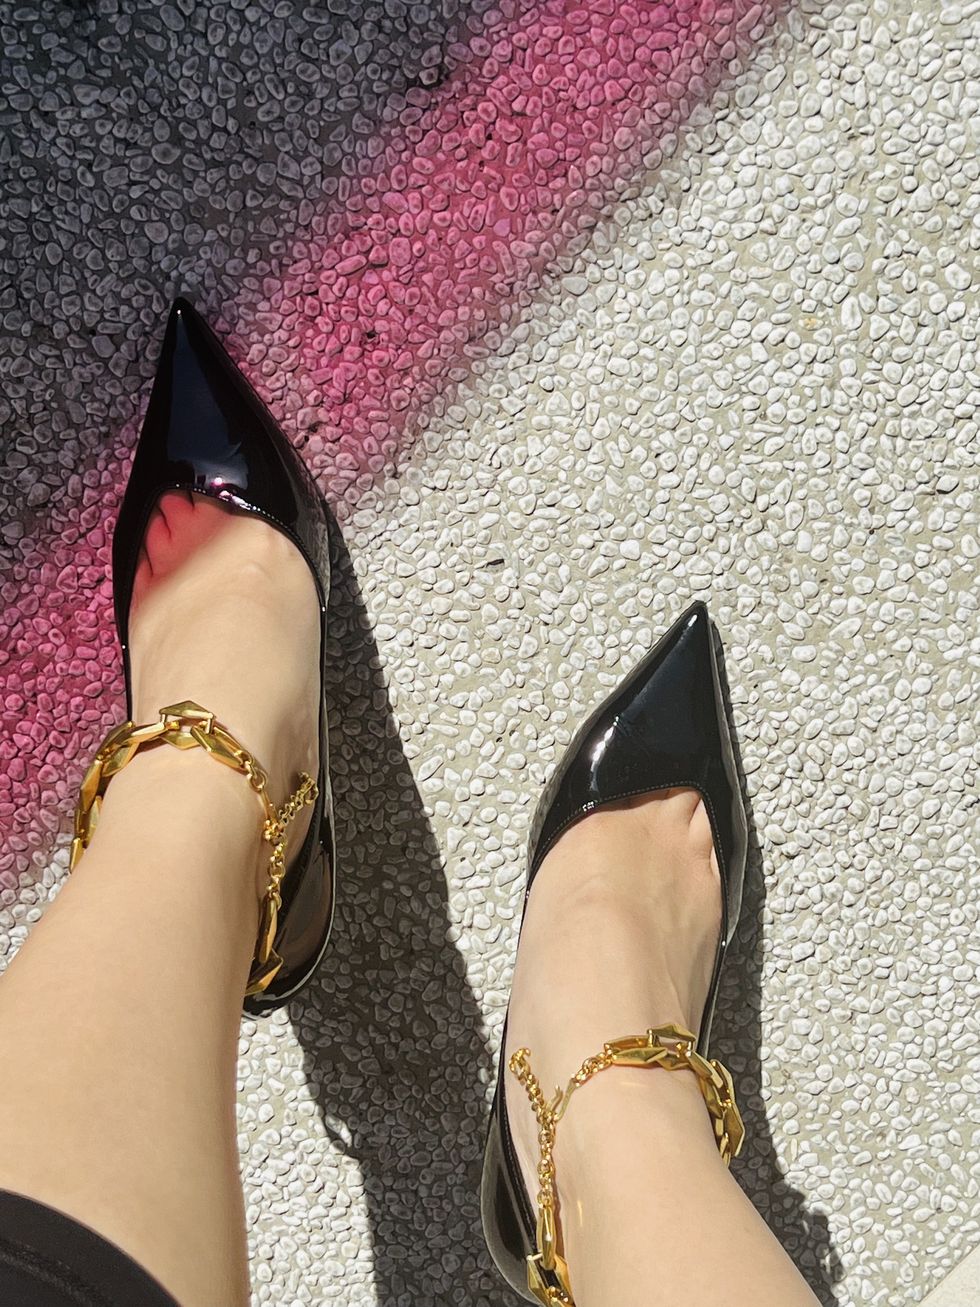 a pair of feet with gold sandals